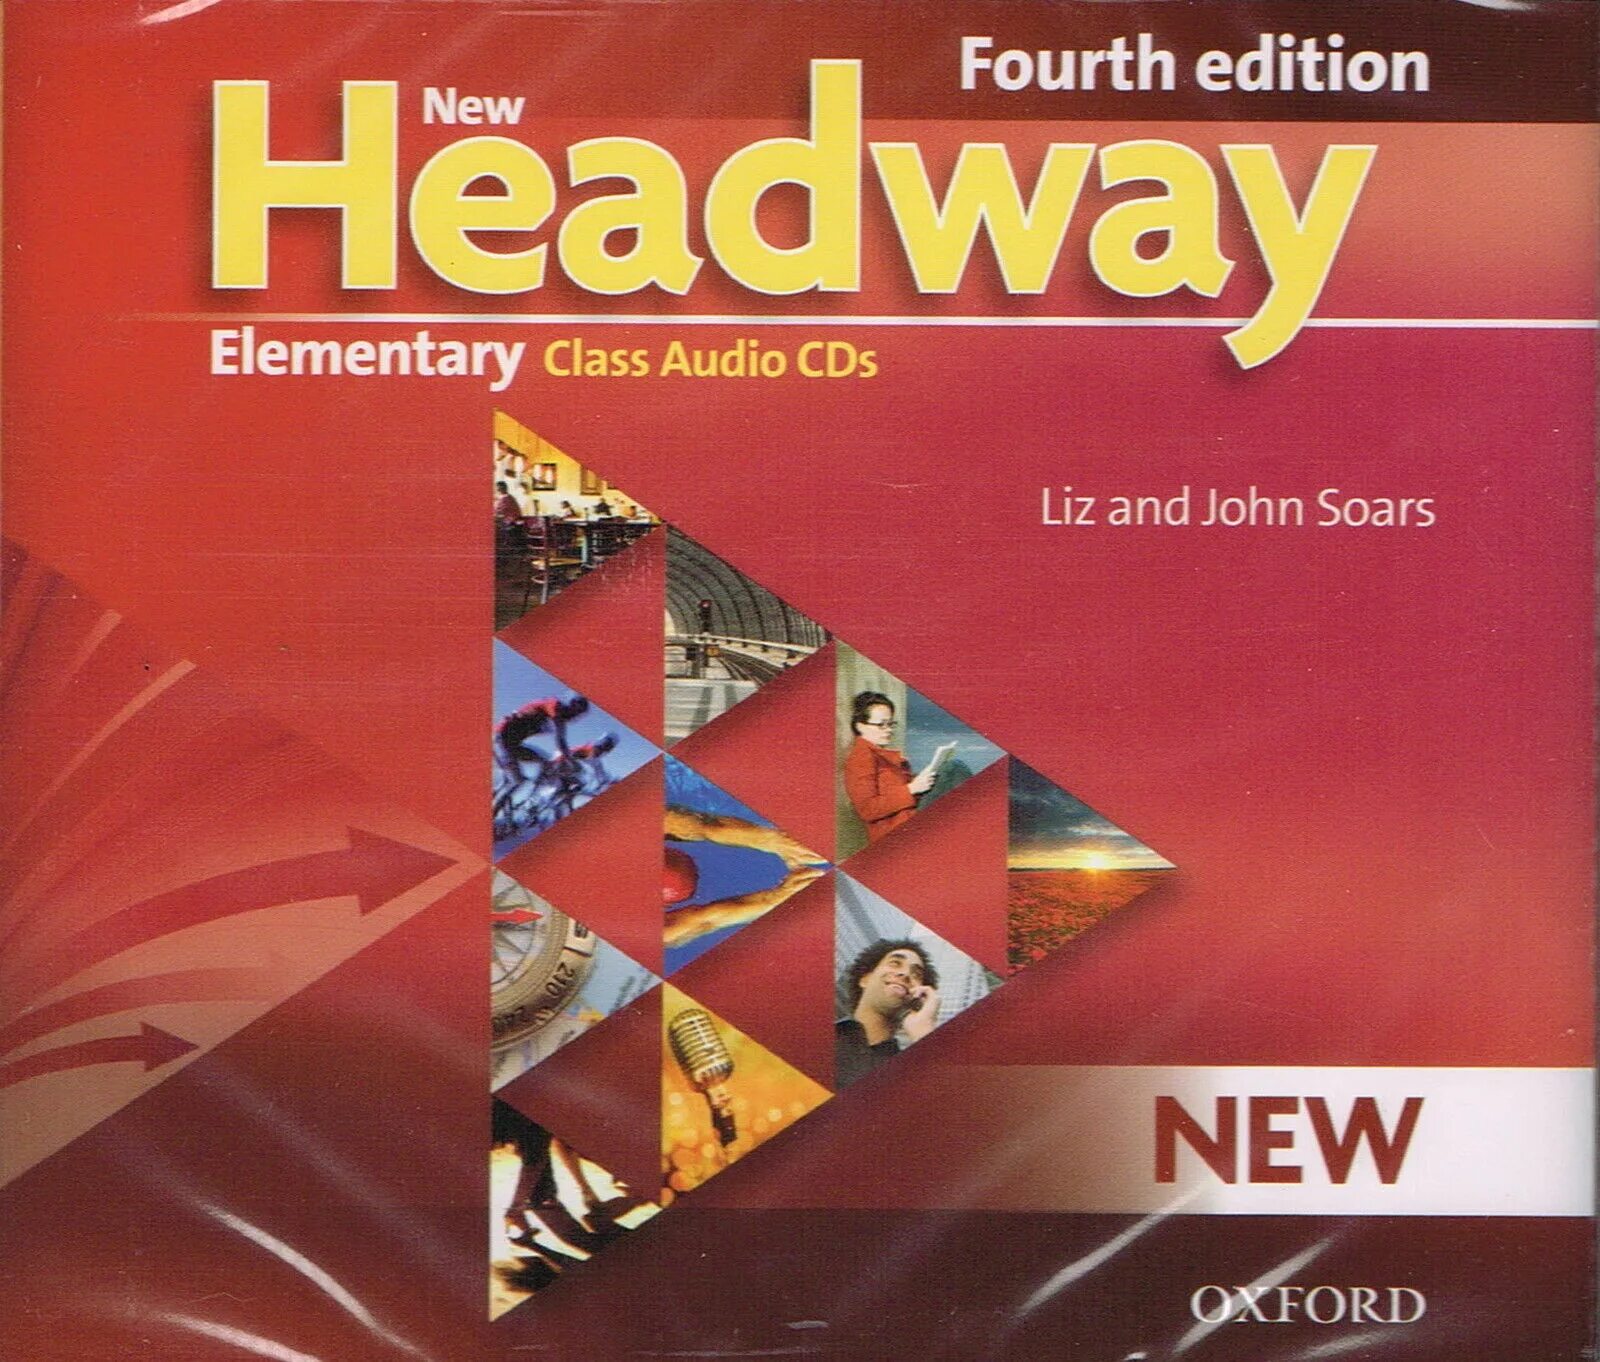 Headway Elementary 4th Edition. New Headway 4th Edition. Тест Headway Elementary 4 Edition. Headway Elementary 4th Edition Audio. New headway intermediate audio